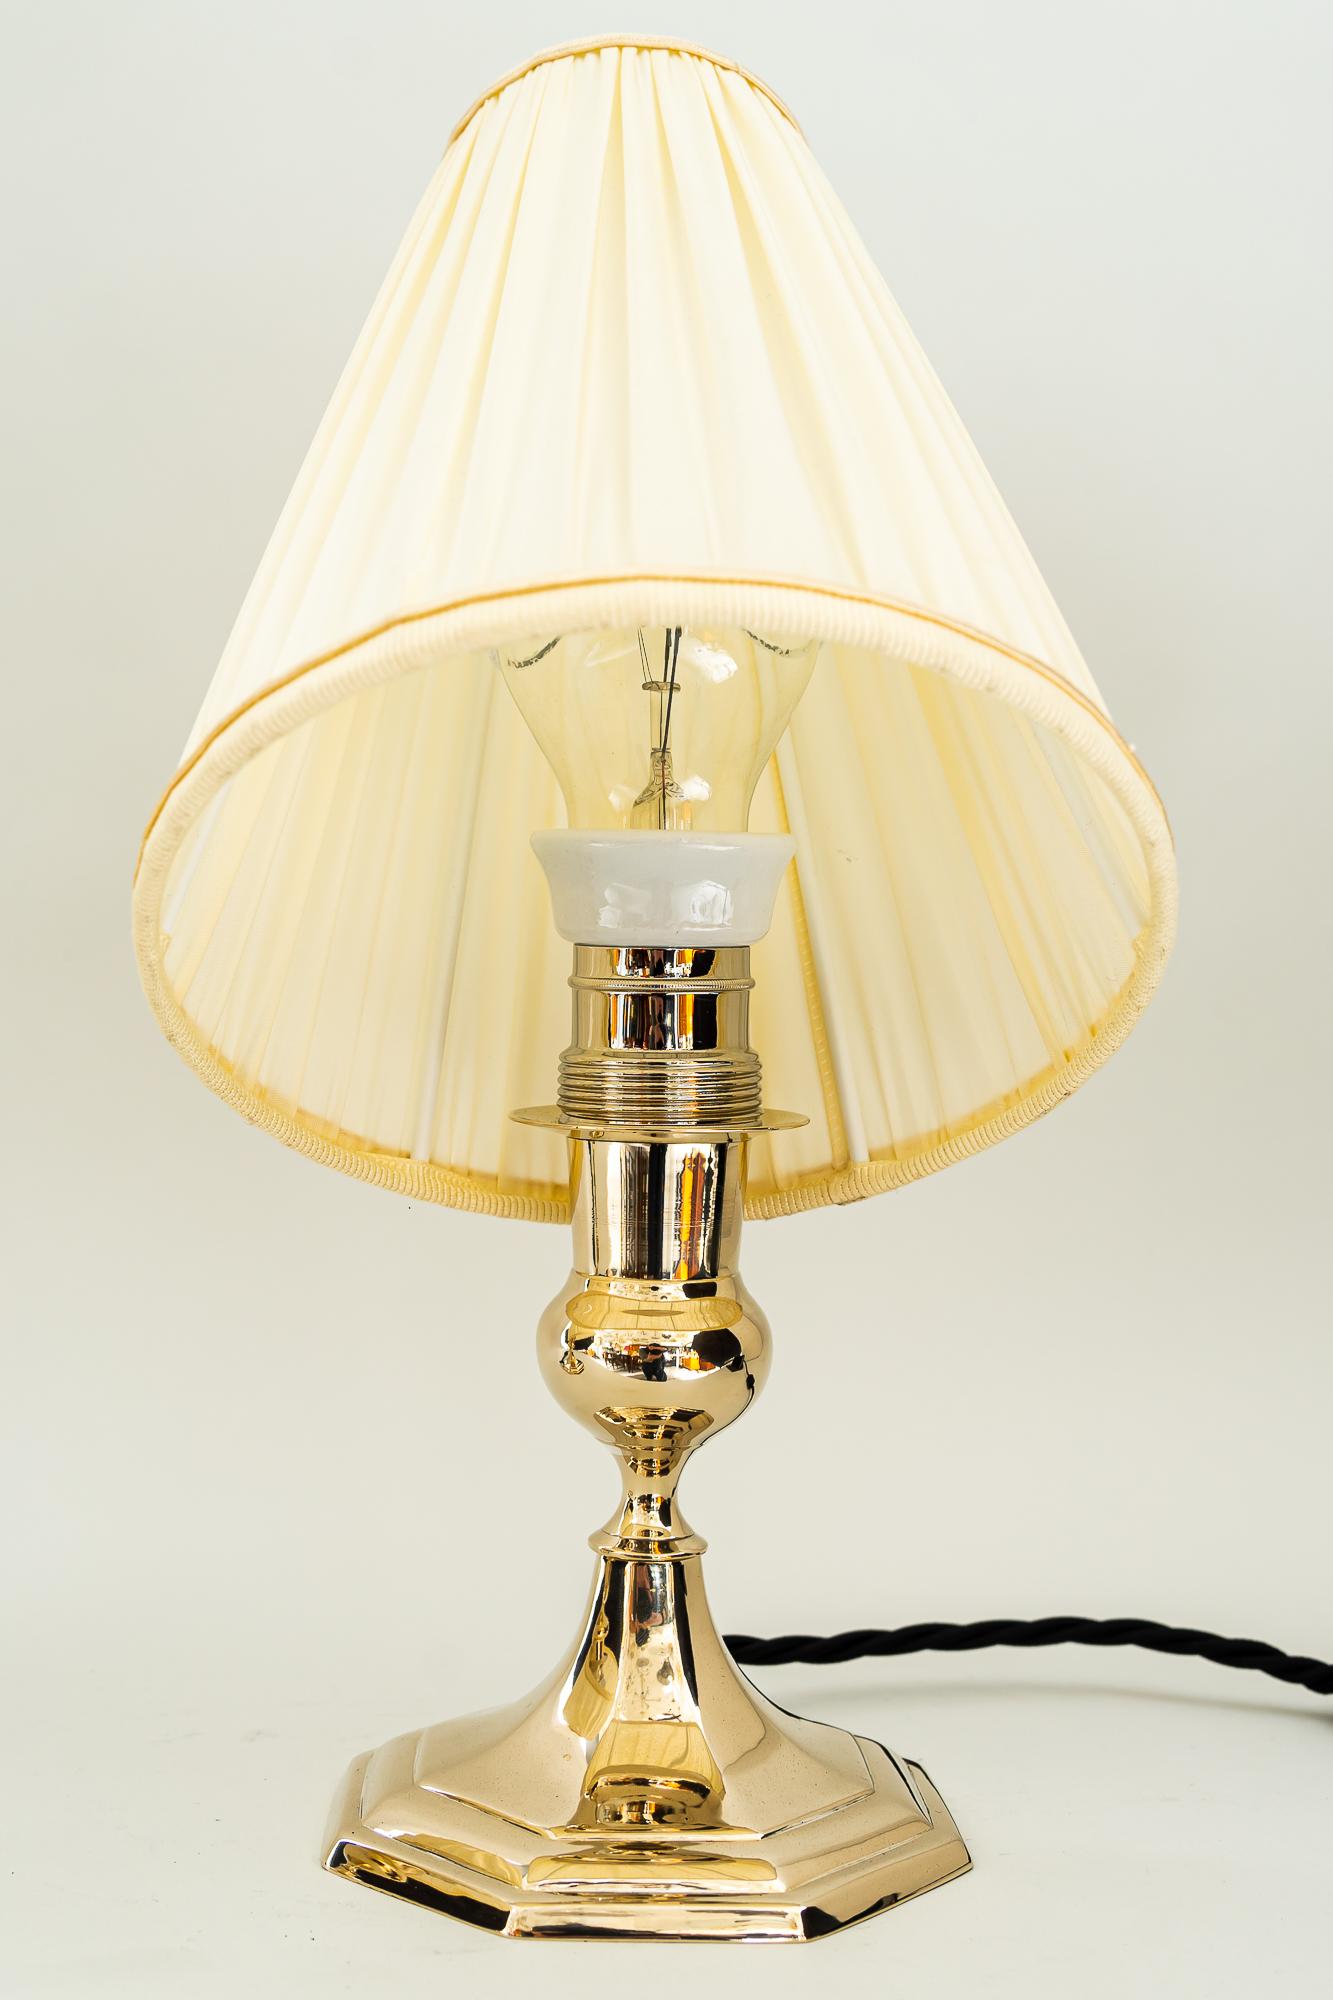 2 Art Deco Table Lamps with Fabric Shades, Vienna, Around 1920s  For Sale 1